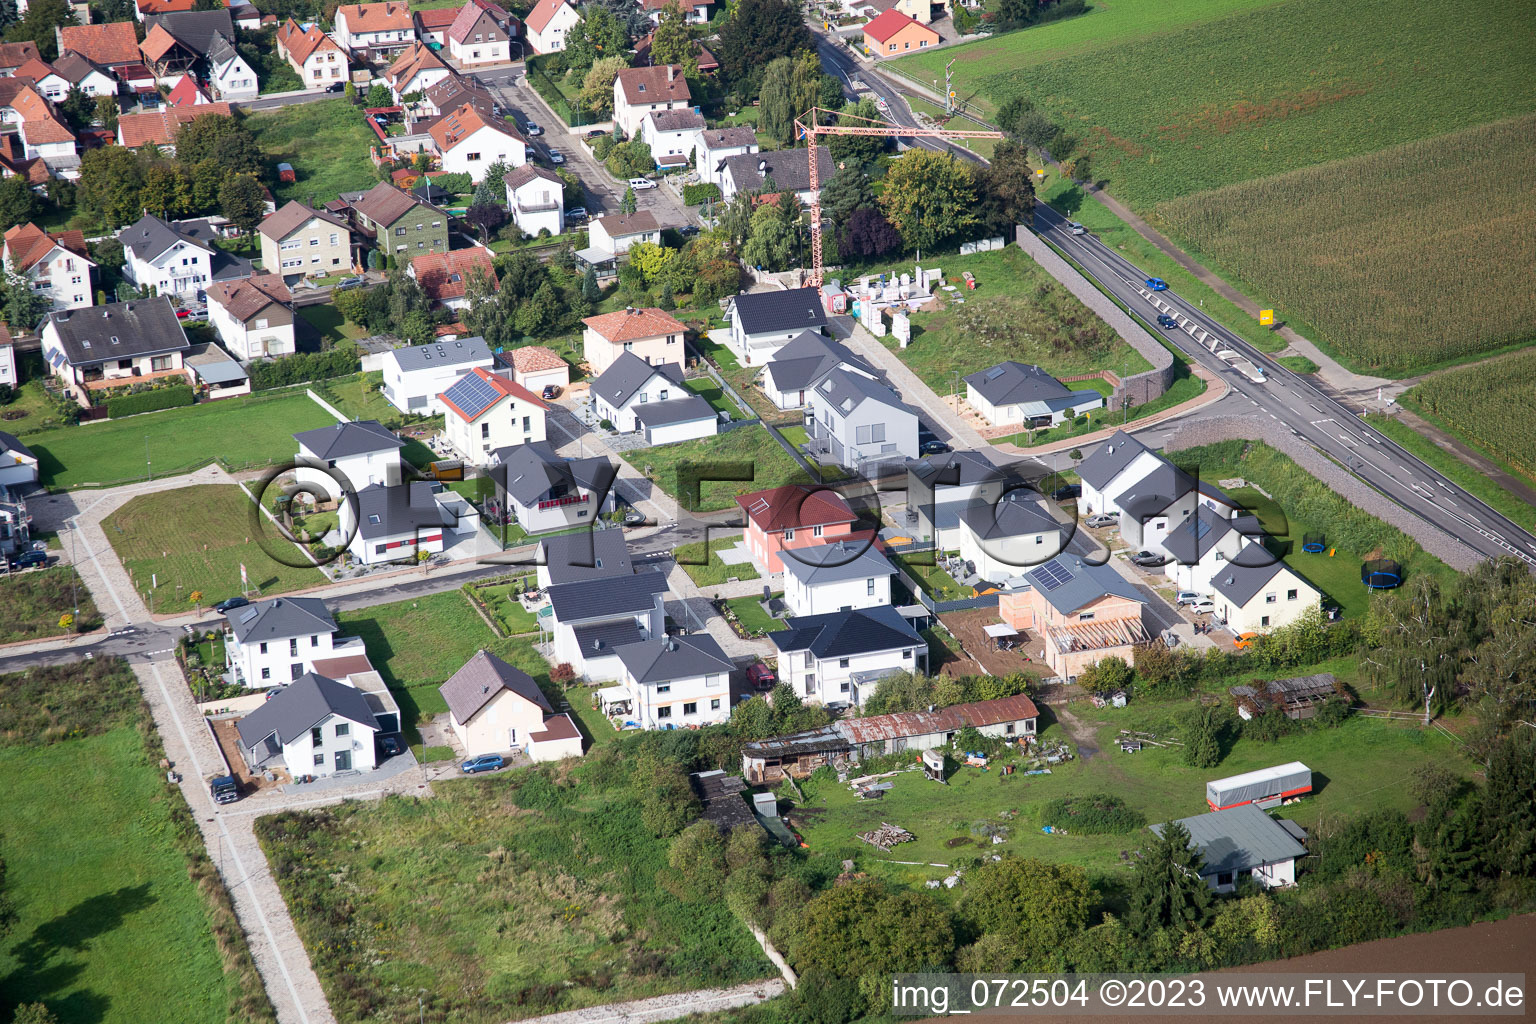 New development area west in Minfeld in the state Rhineland-Palatinate, Germany